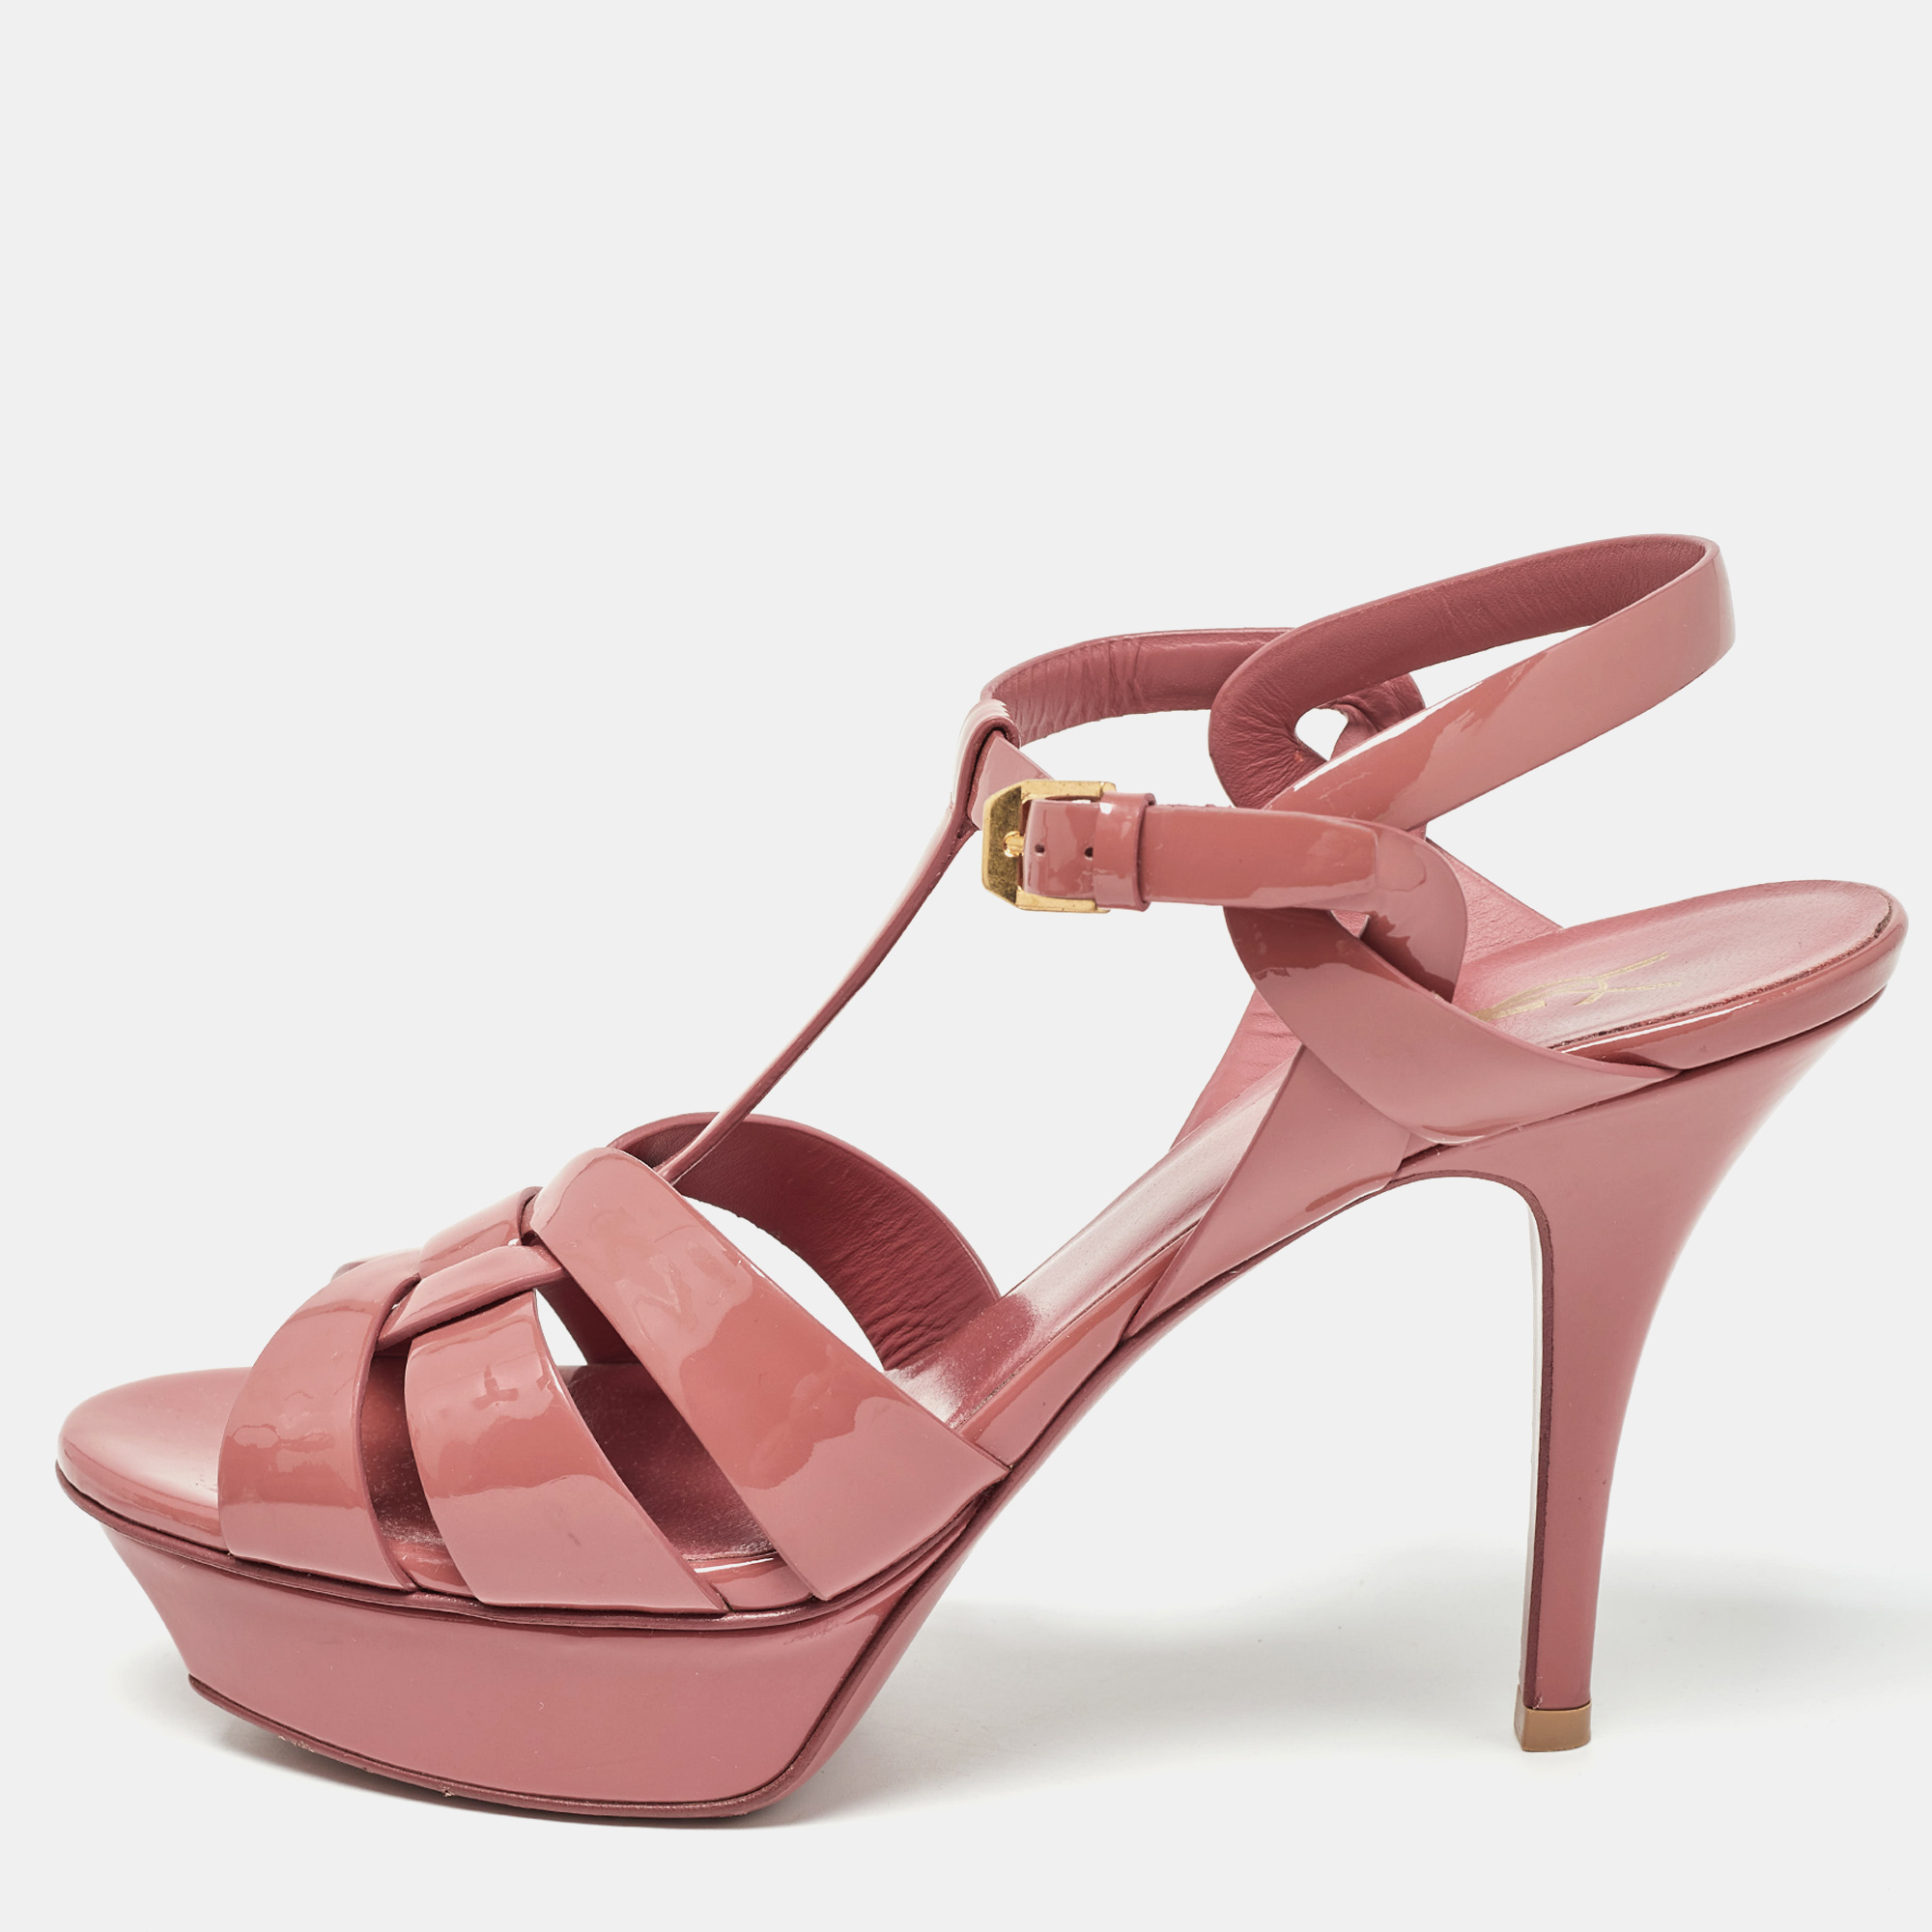 Pre-owned Saint Laurent Pink Patent Leather Tribute Sandals Size 39.5